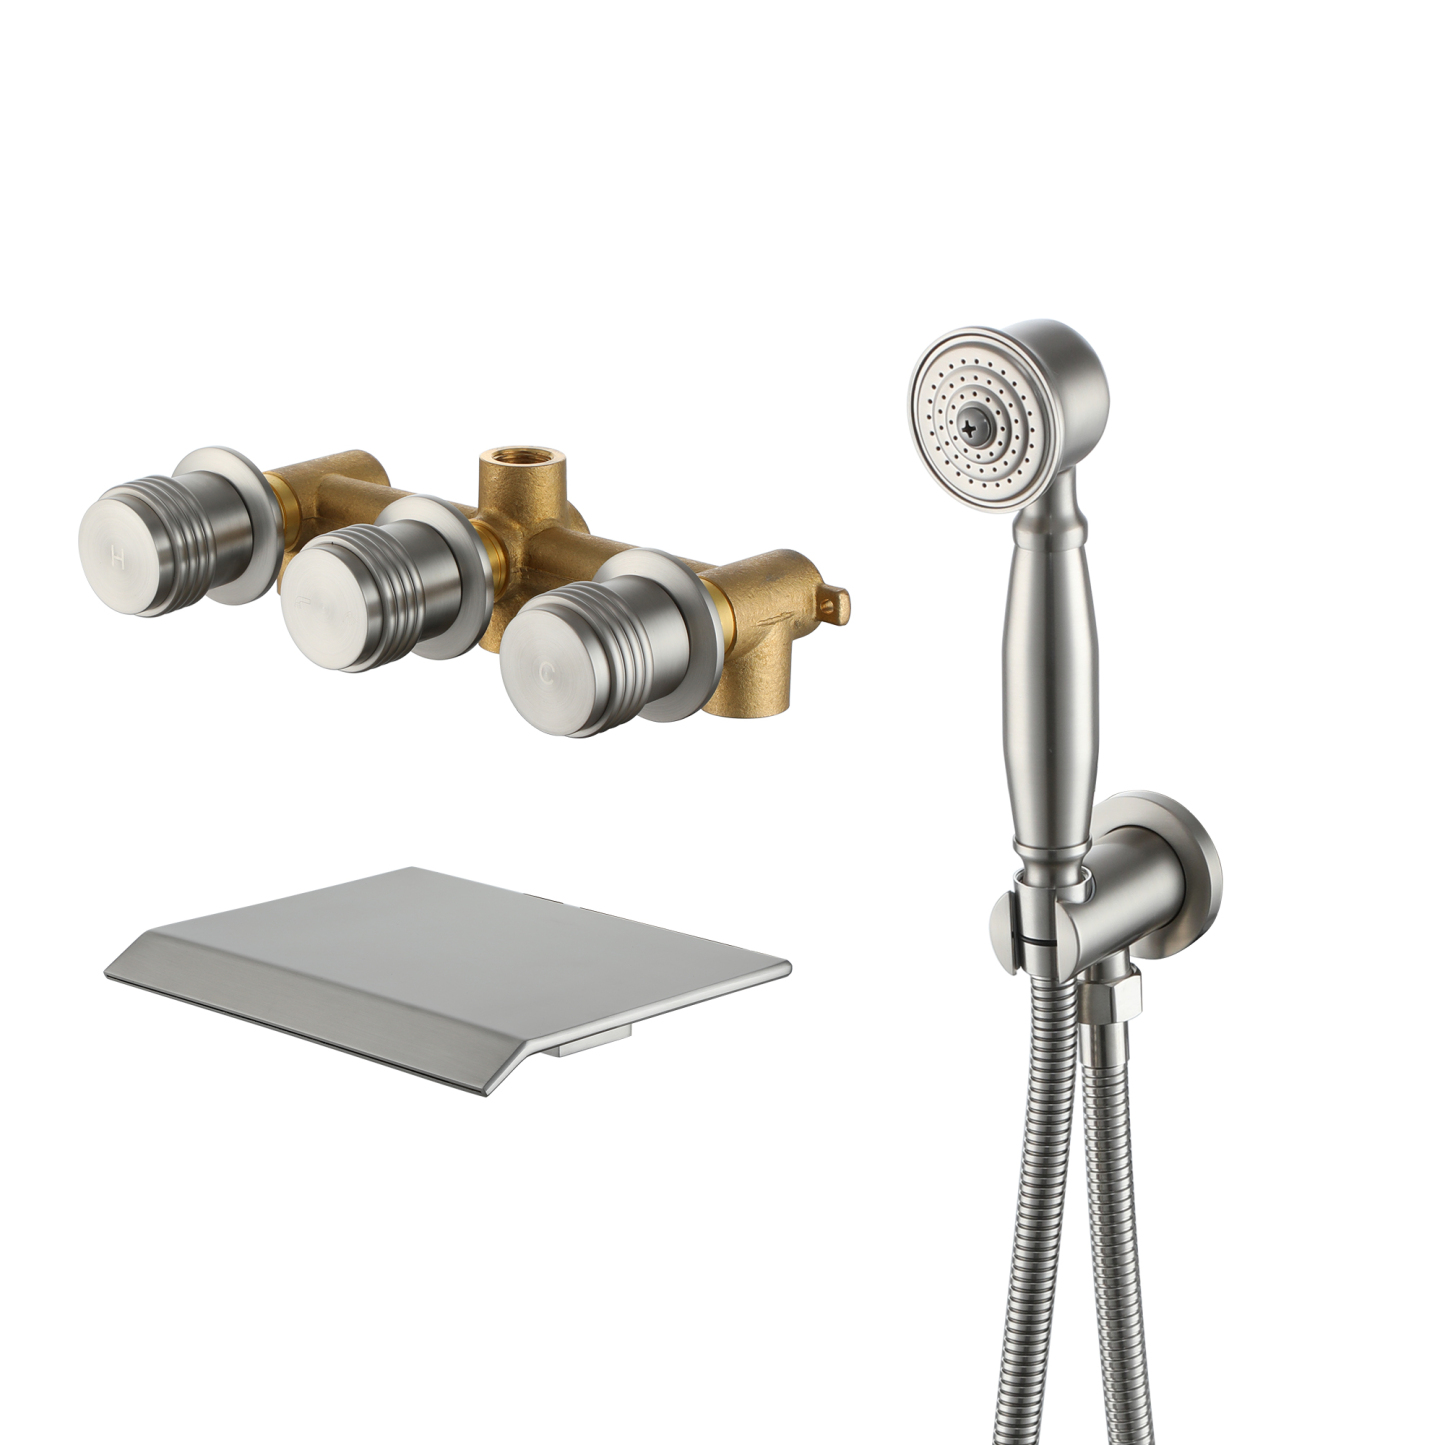 Eleanor 3-Handle Waterfall Wide-Spray High Pressure Tub and Shower Faucet With Valve